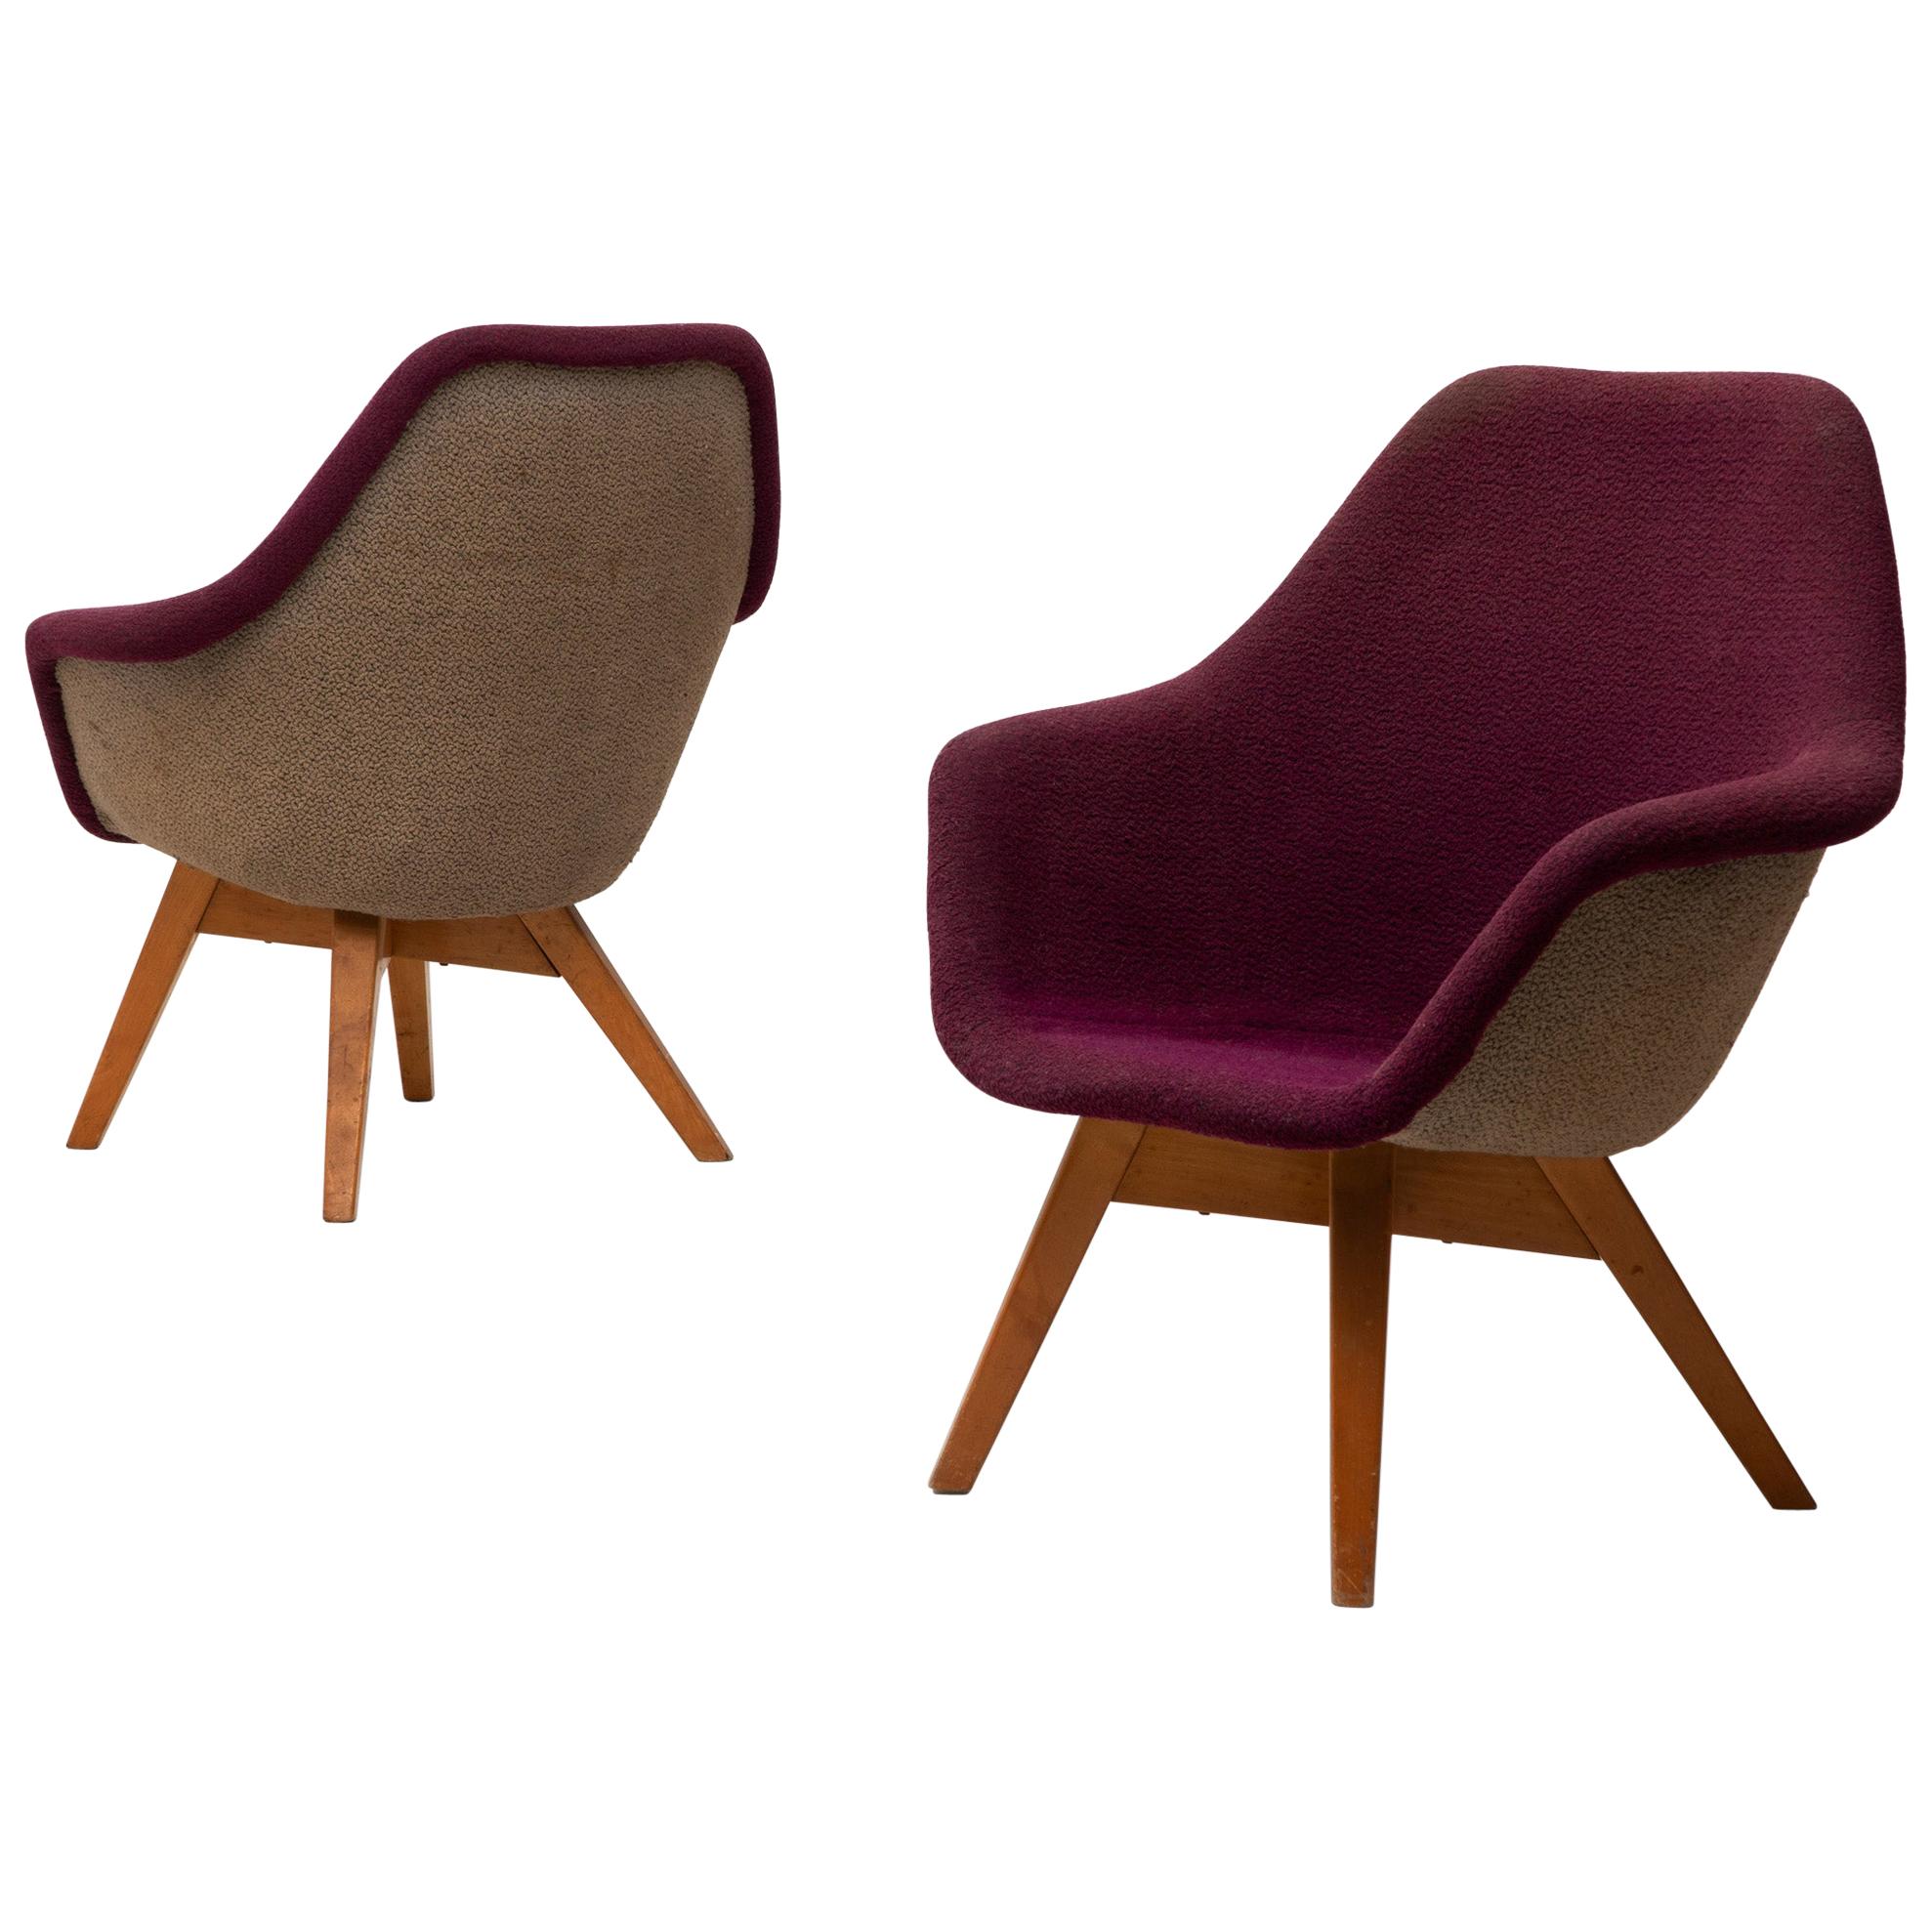 Set of 2 Lounge Chairs by Miroslav Navratil in Fabric and Oak, 1960s For Sale